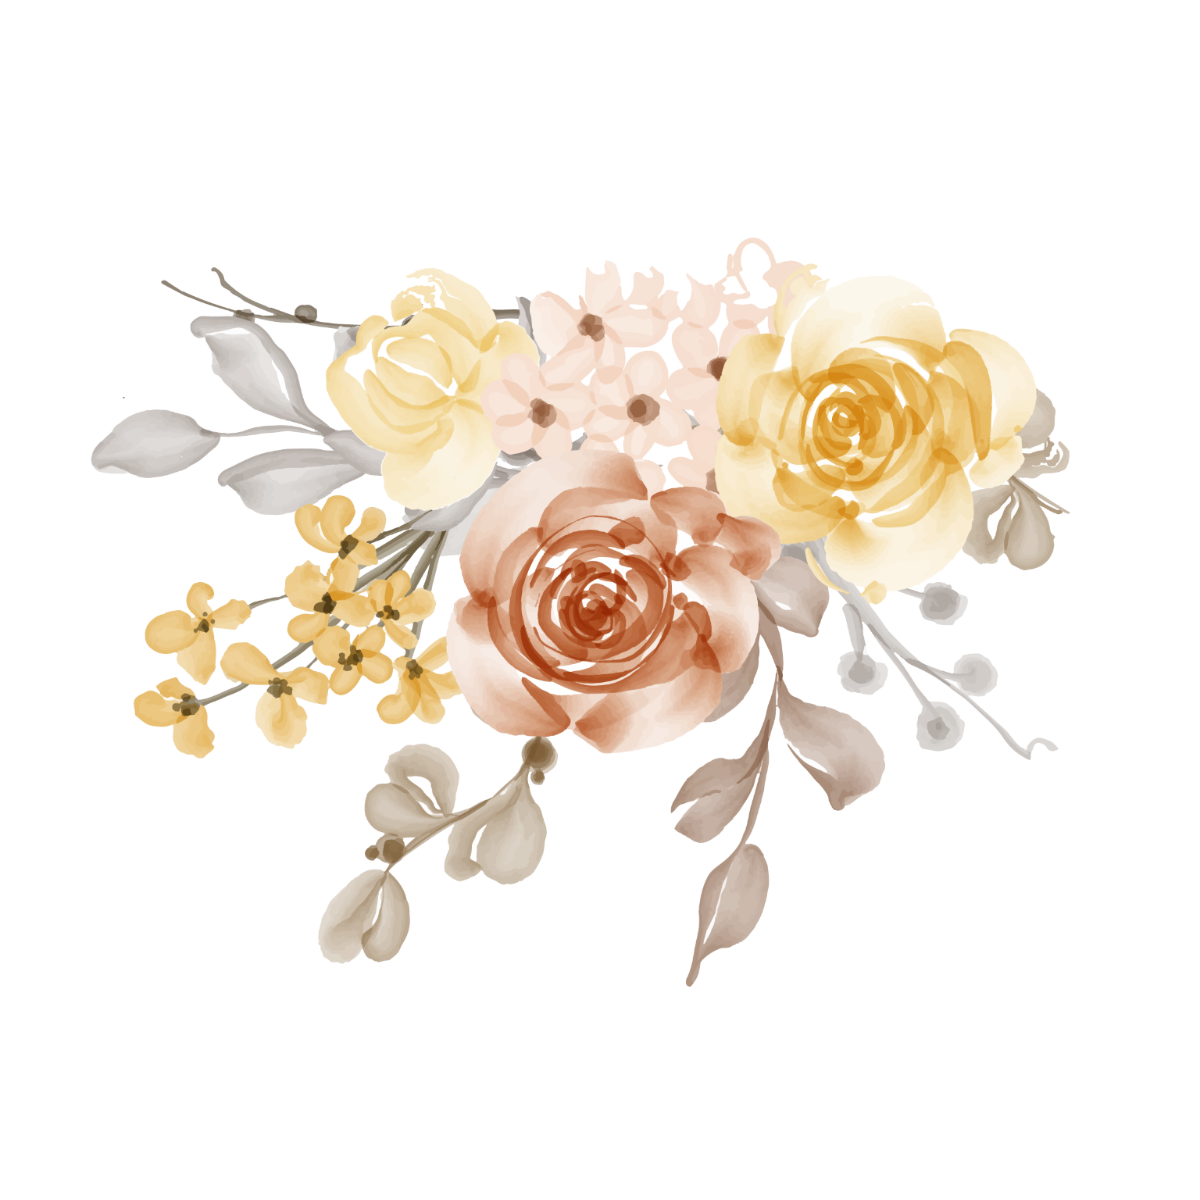 Free Watercolor Floral